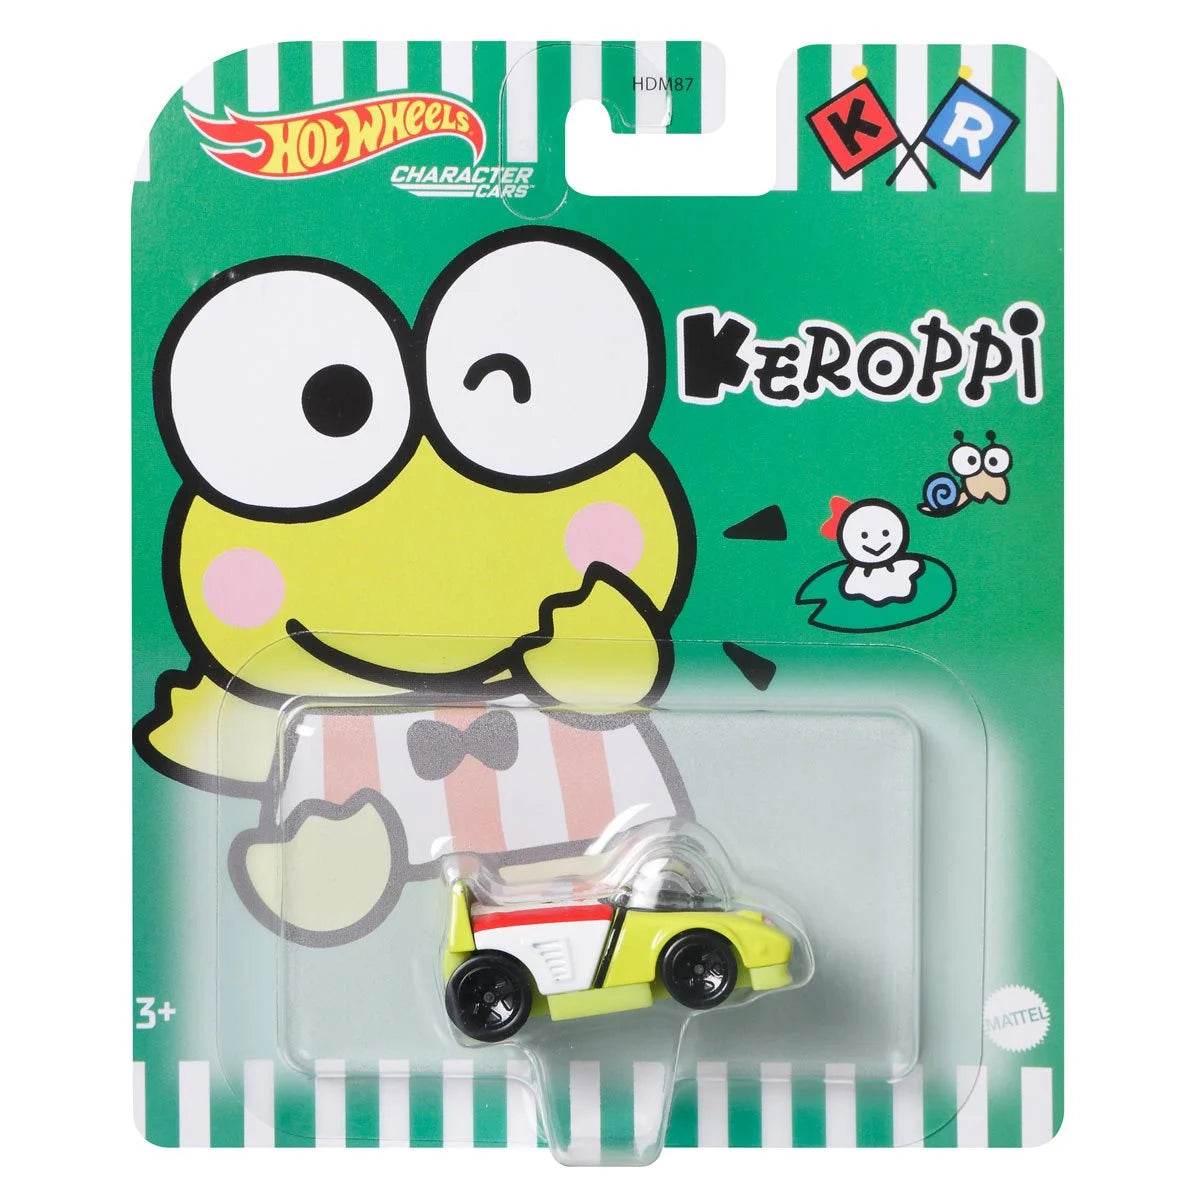 Sanrio Hello Kitty and friends Hot Wheels Character Cars